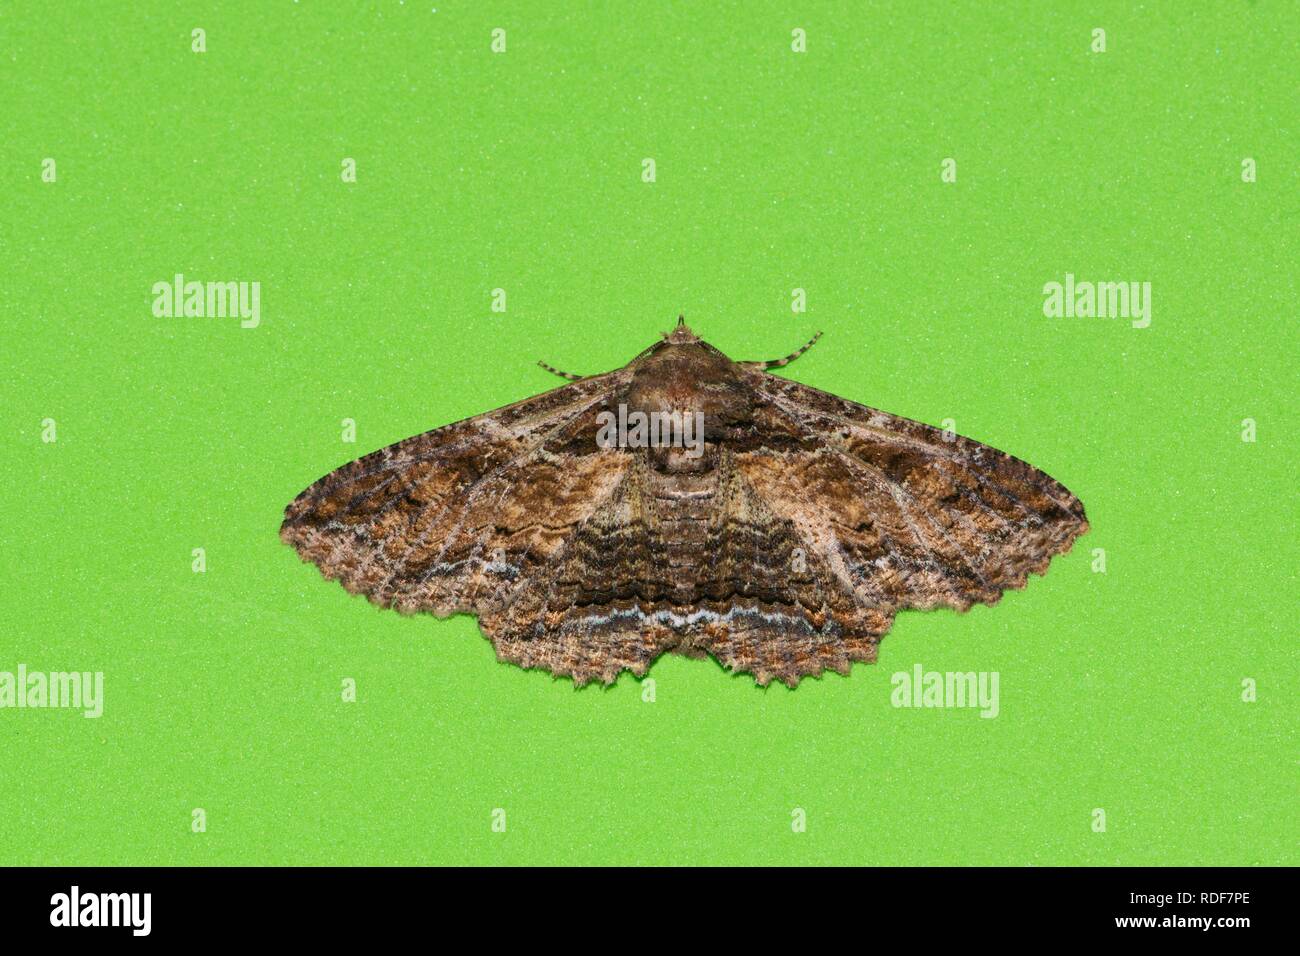 Image of a brown moth of the Zale genus, centered and isolated on a green background. Stock Photo